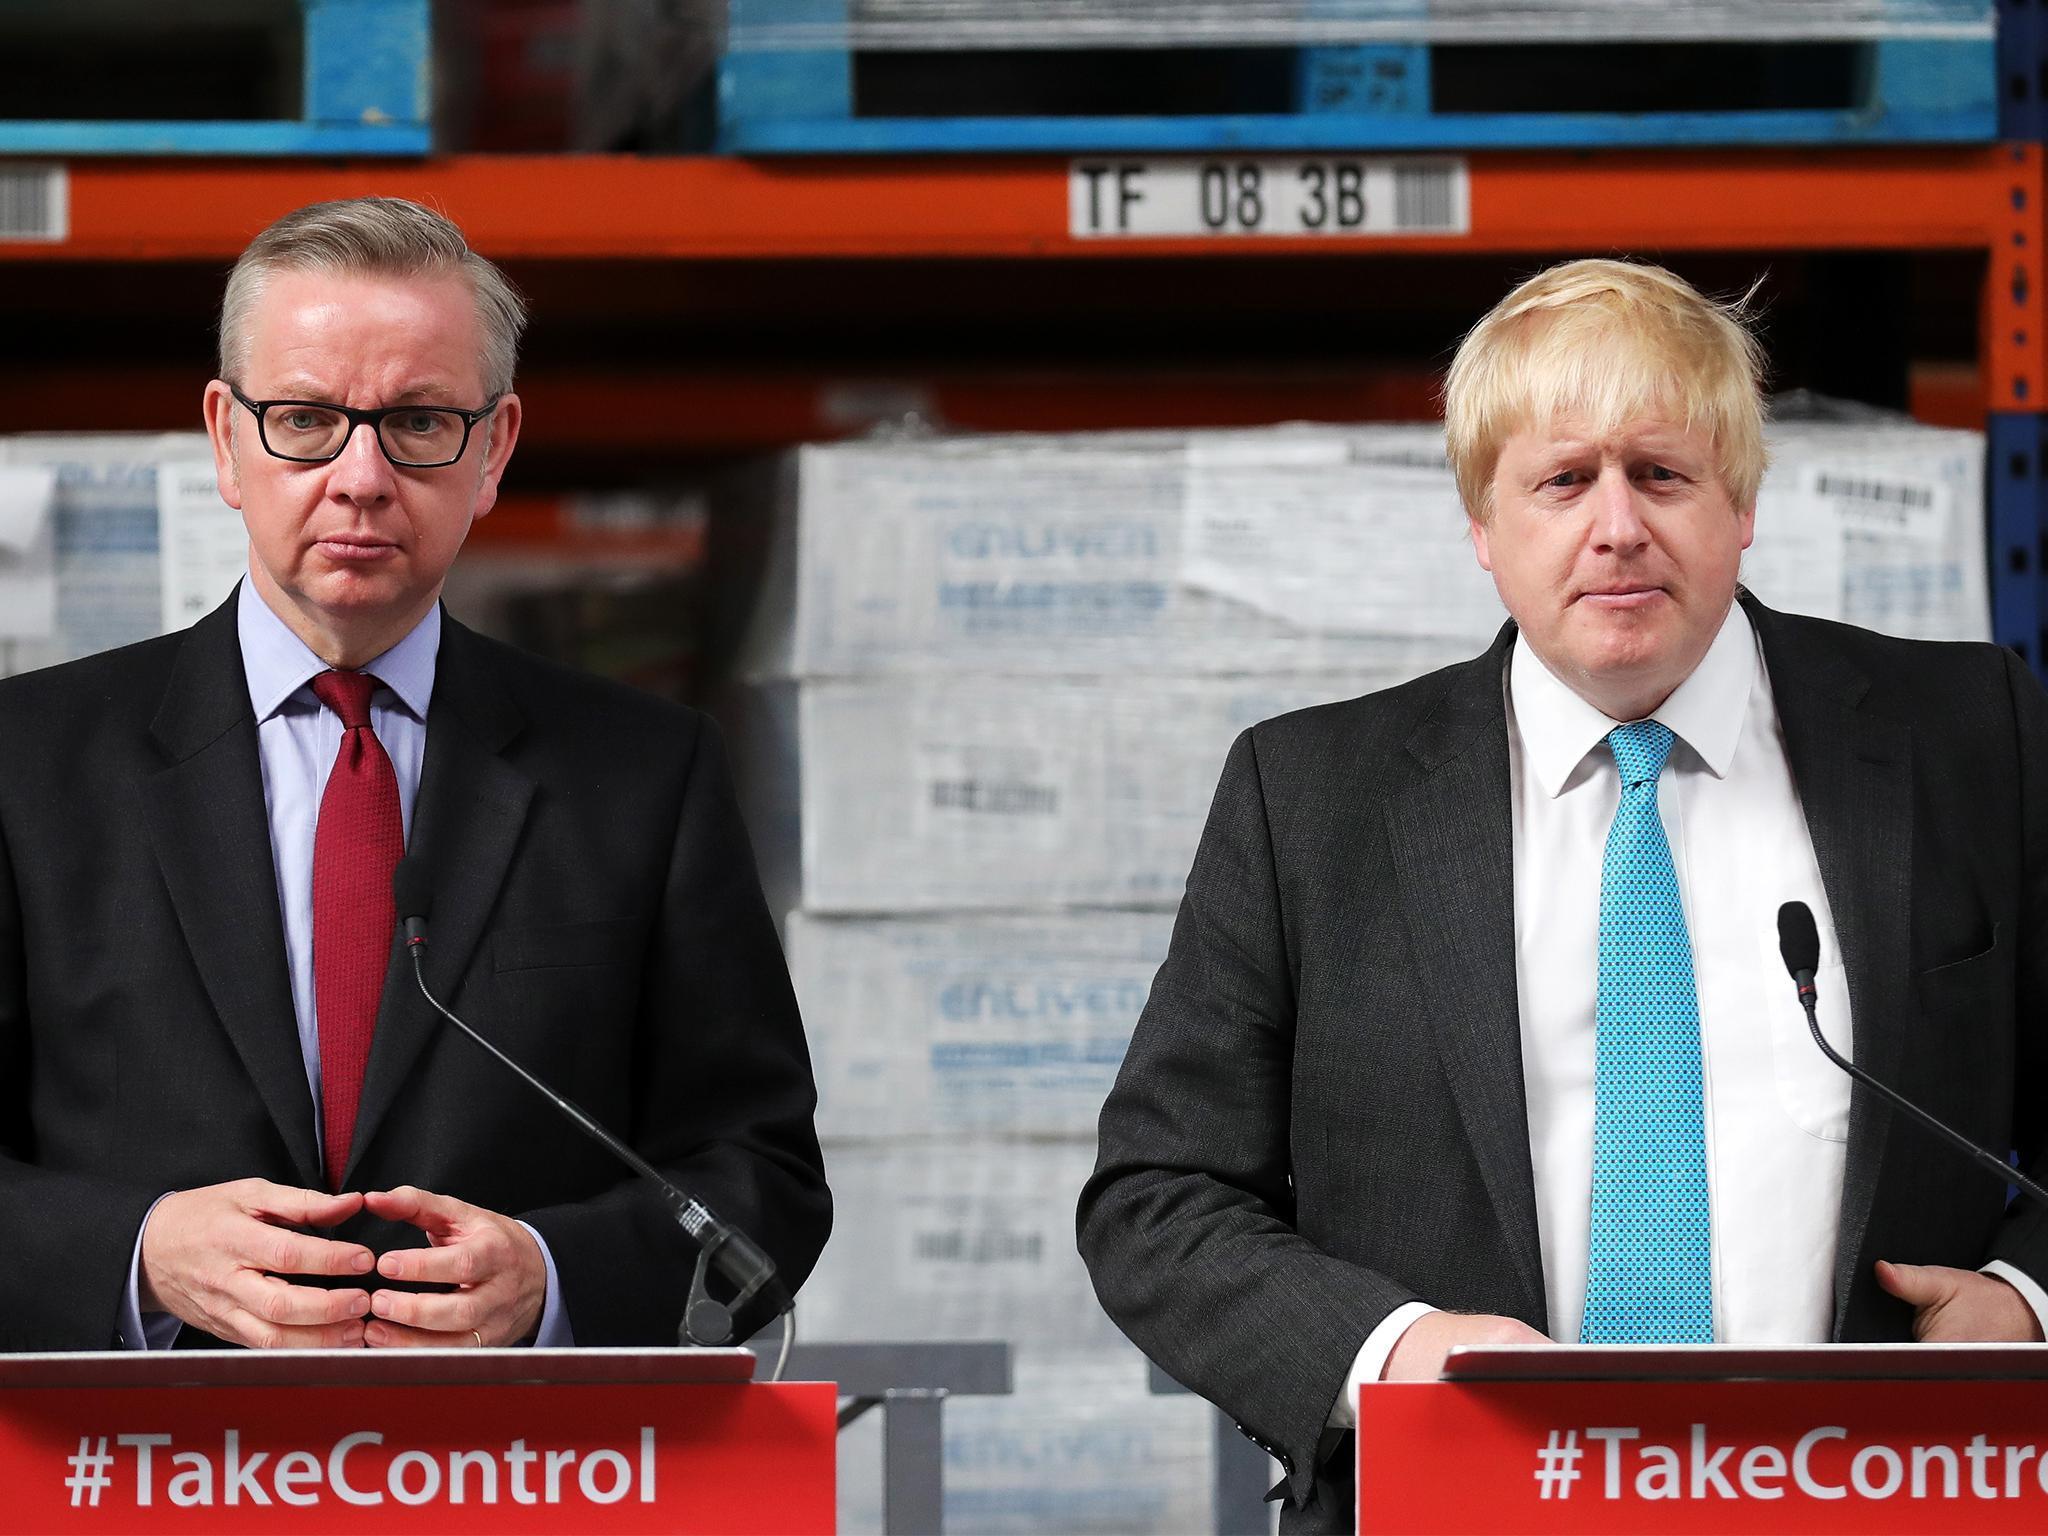 Boris Johnson and Michael Gove address workers during a Vote Leave campaign visit to DCS Manufacturing Group on June 6, 20016 in Stratford-Upon-Avon, England